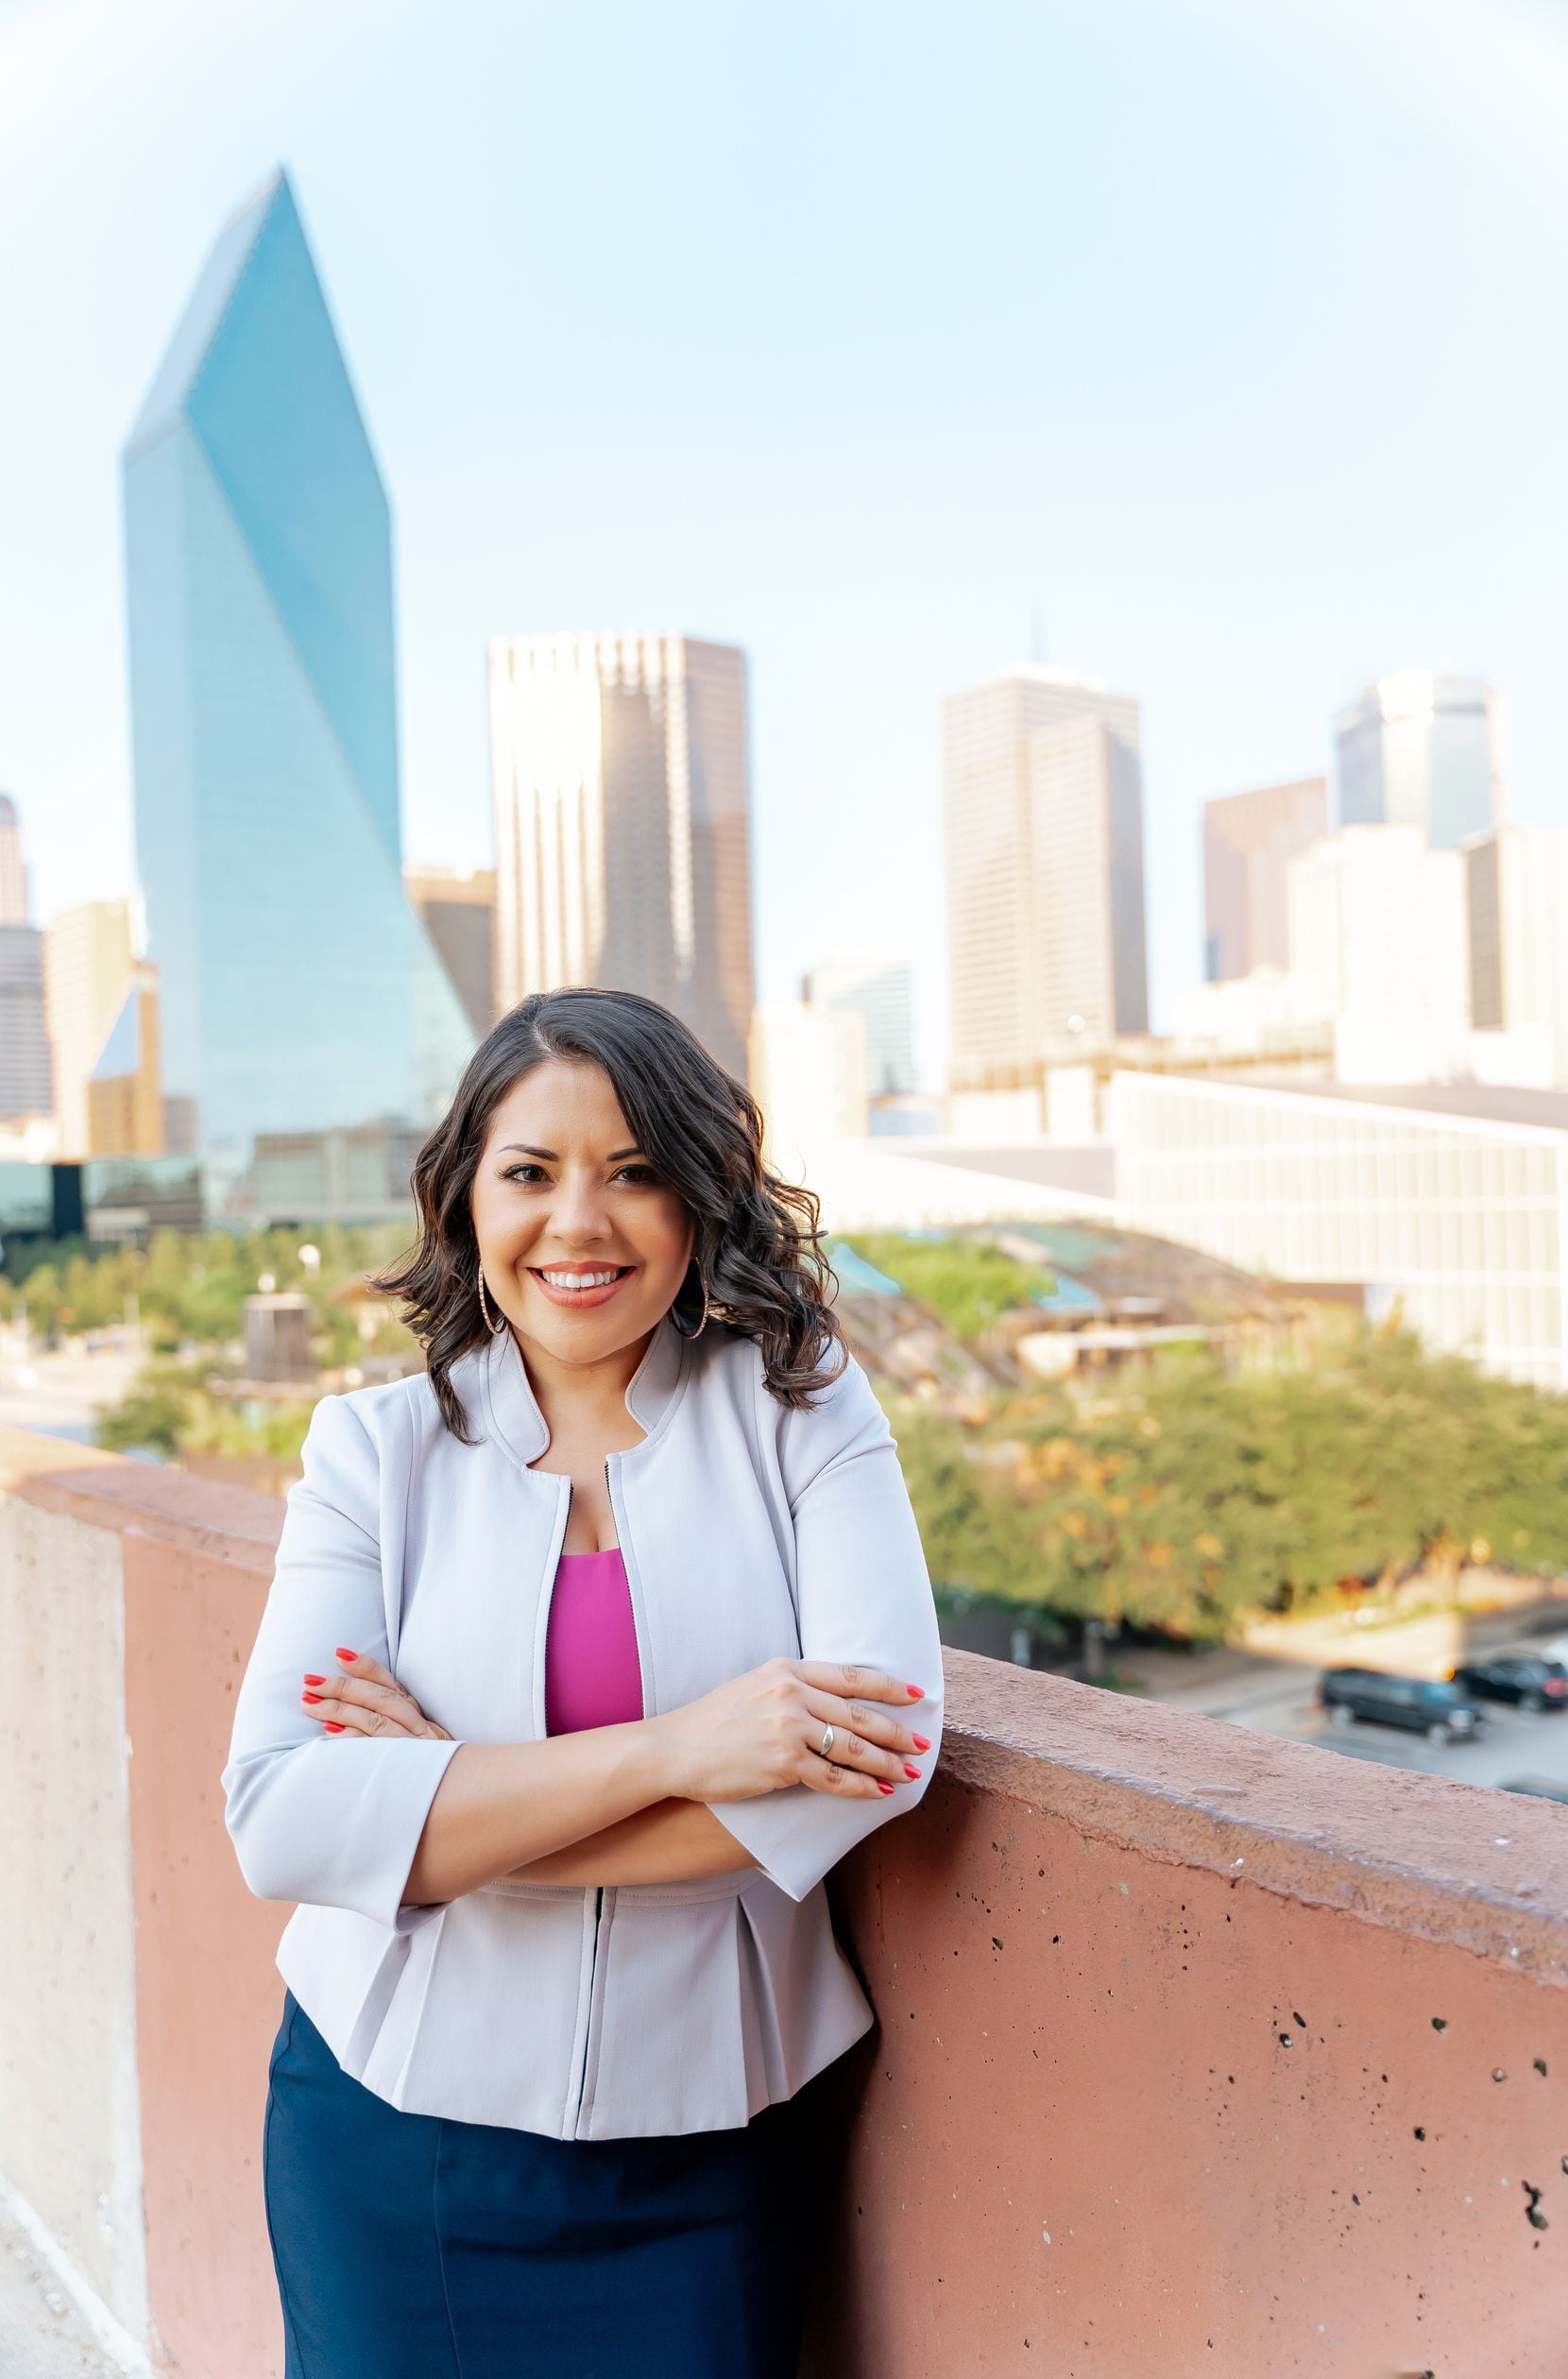 Alexandra Guio, Democratic candidate for District 114